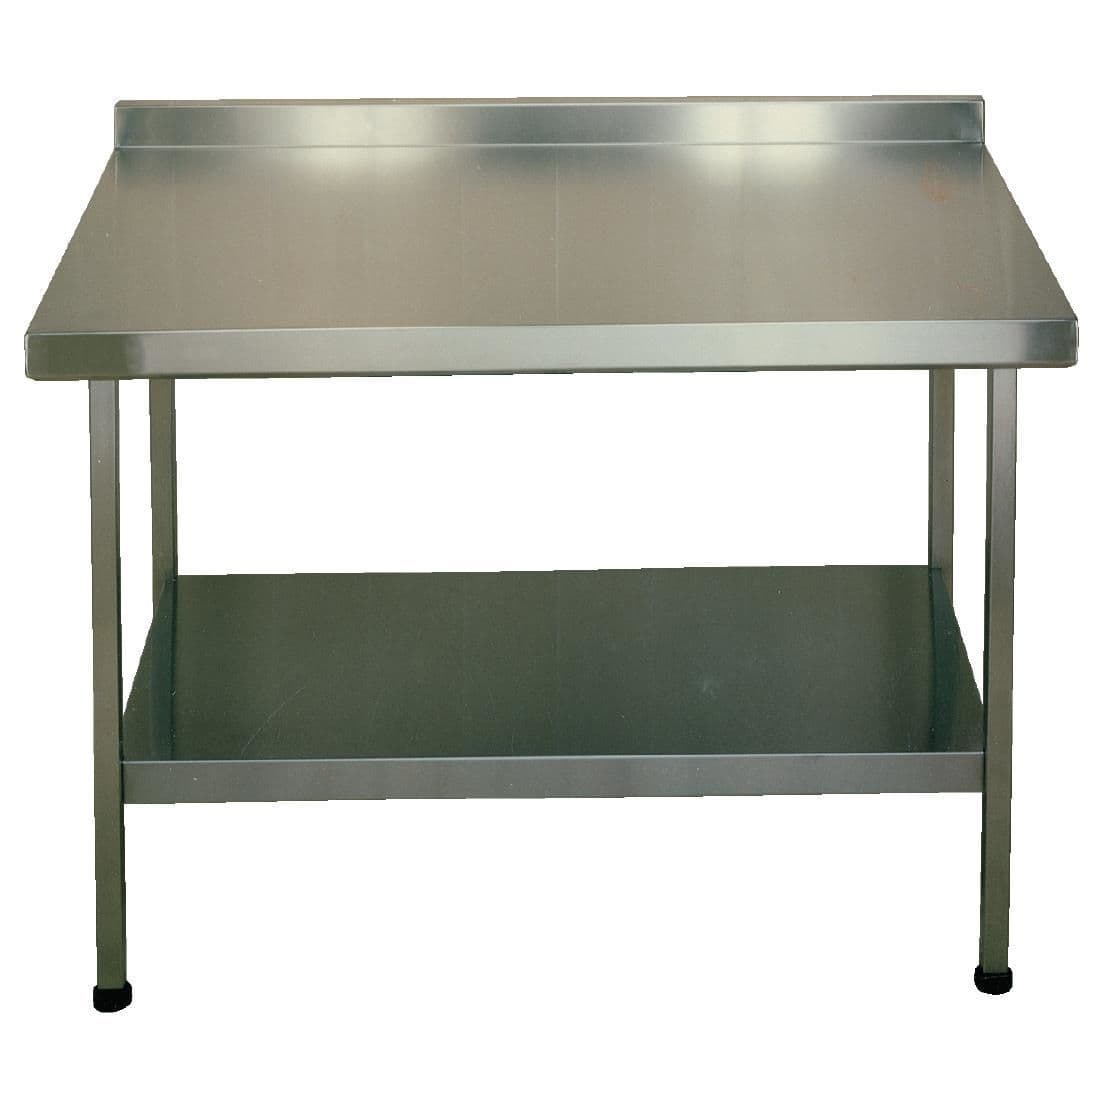 Franke Sissons Stainless Steel Wall Table with Upstand 1200x650mm JD Catering Equipment Solutions Ltd